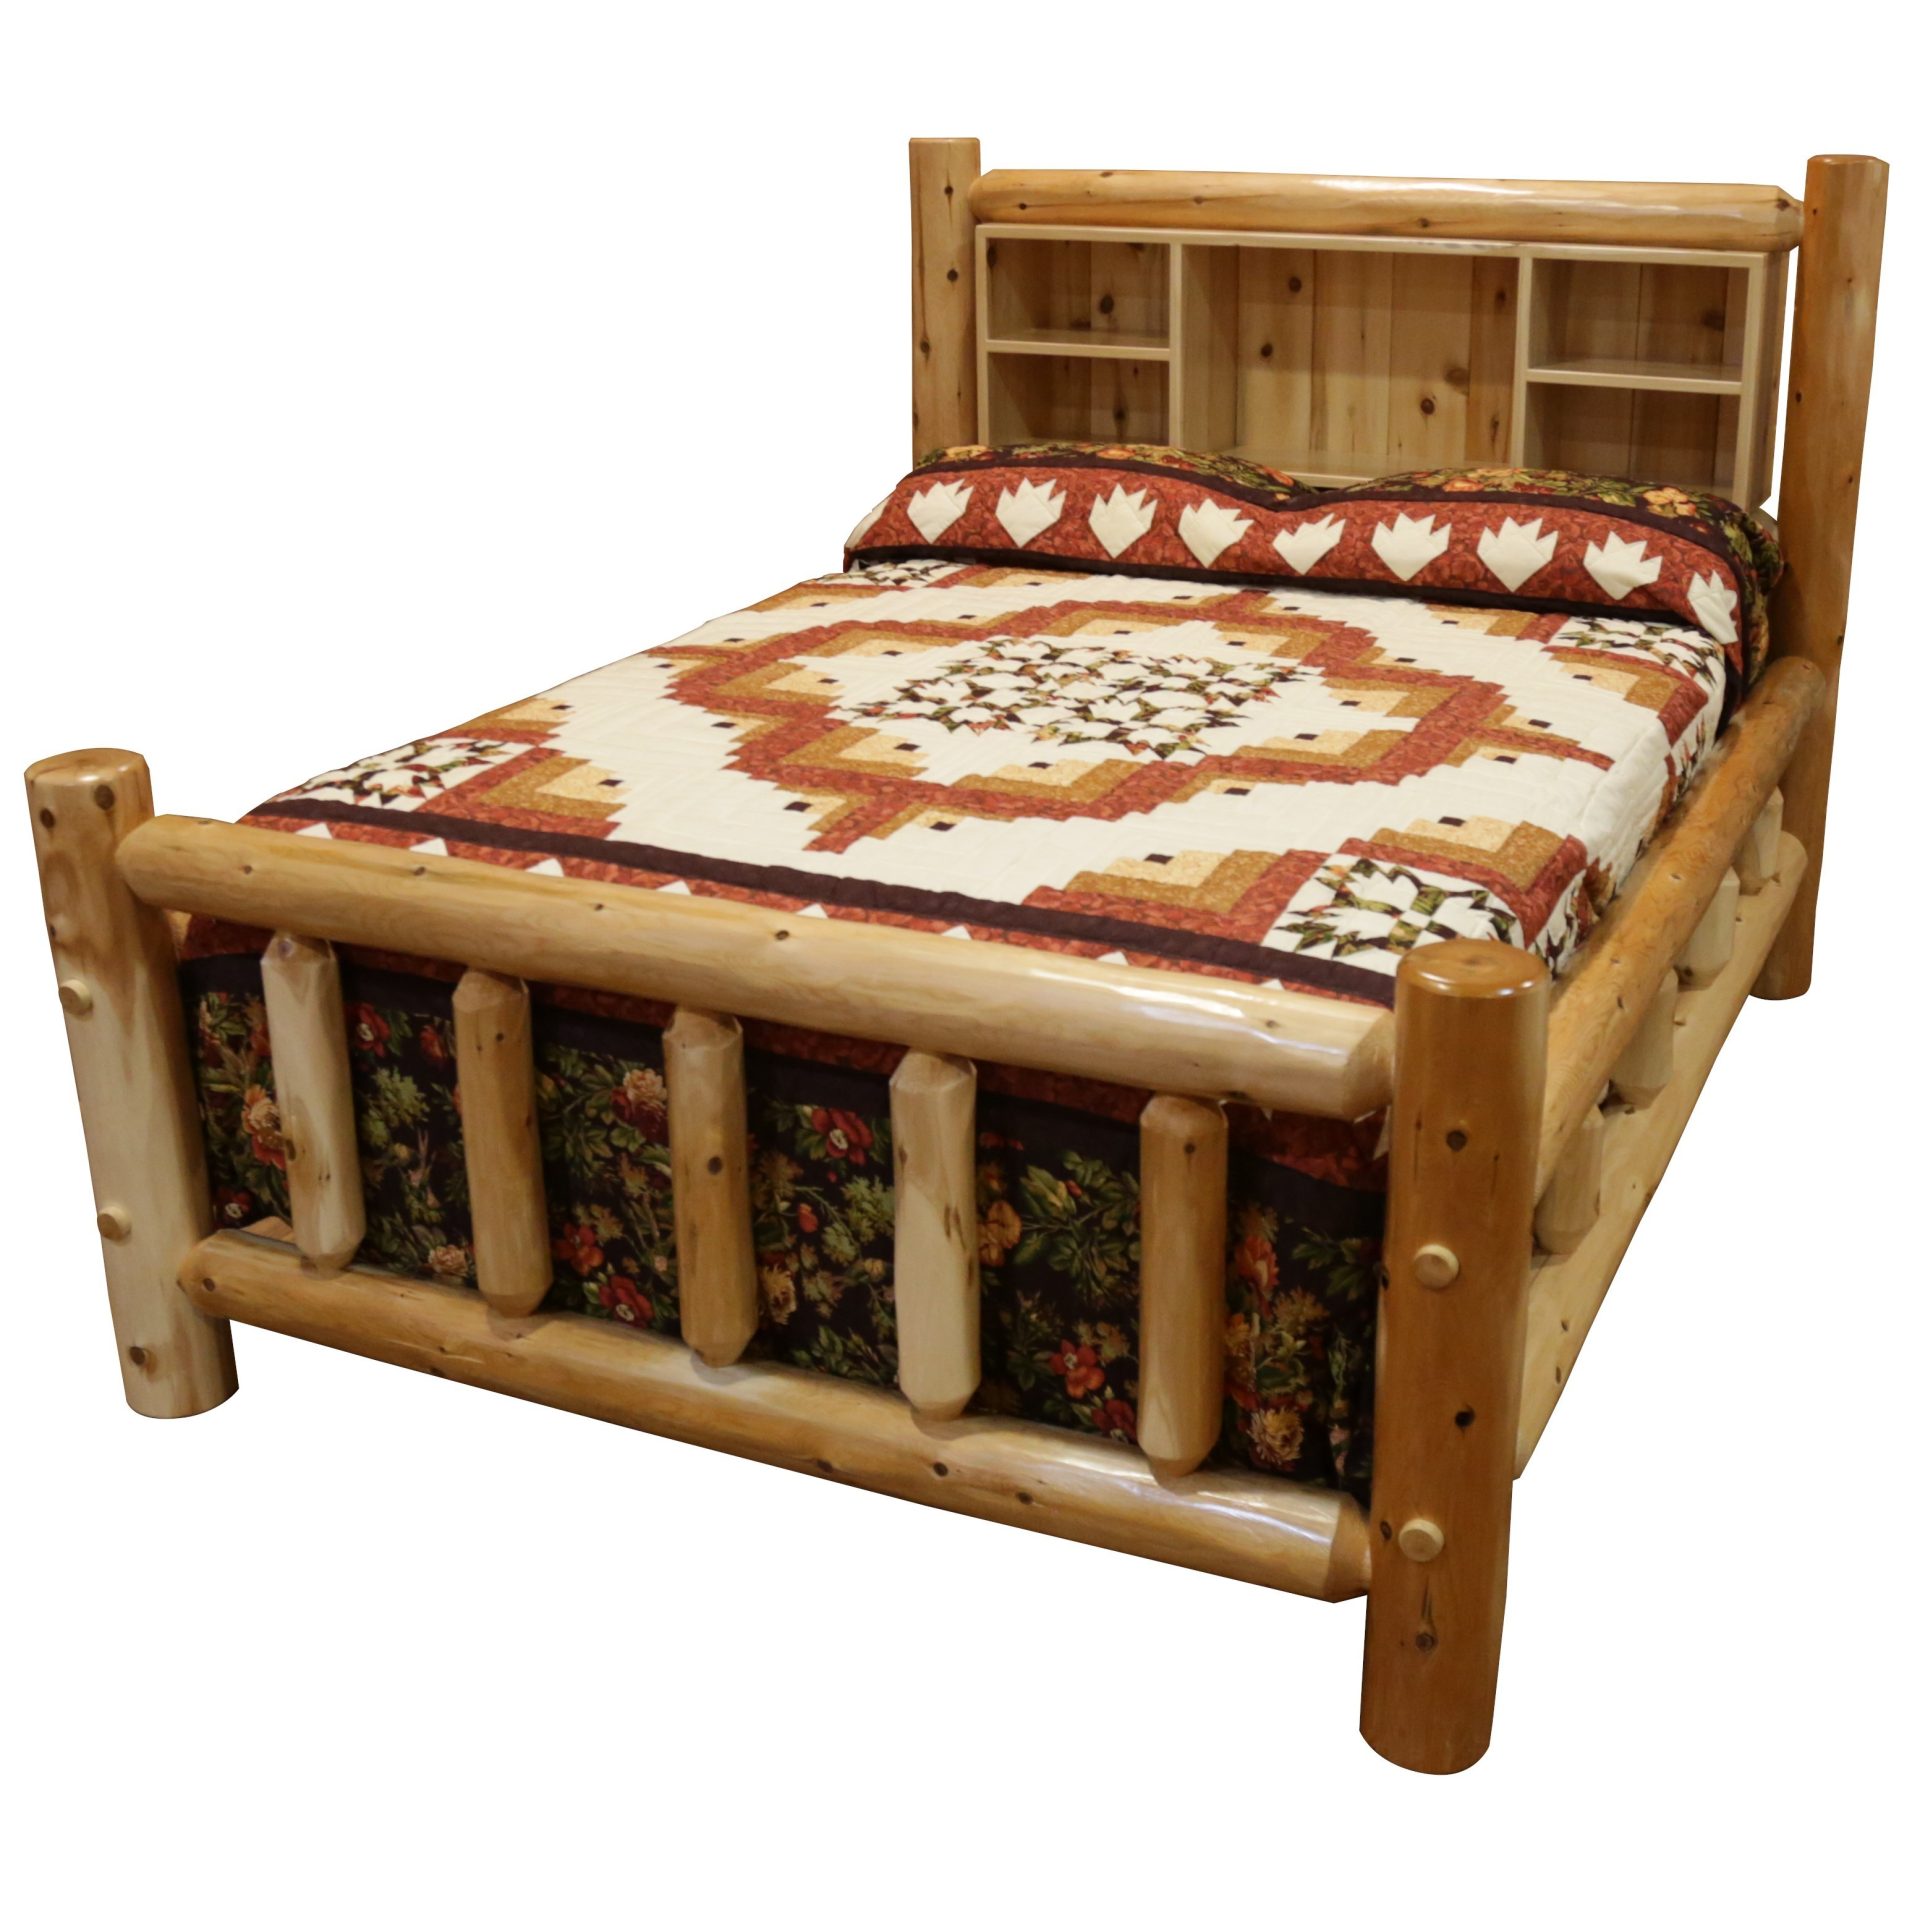 Rustic White Cedar Log Mission Style Bookshelf Bed With Double Side Rail